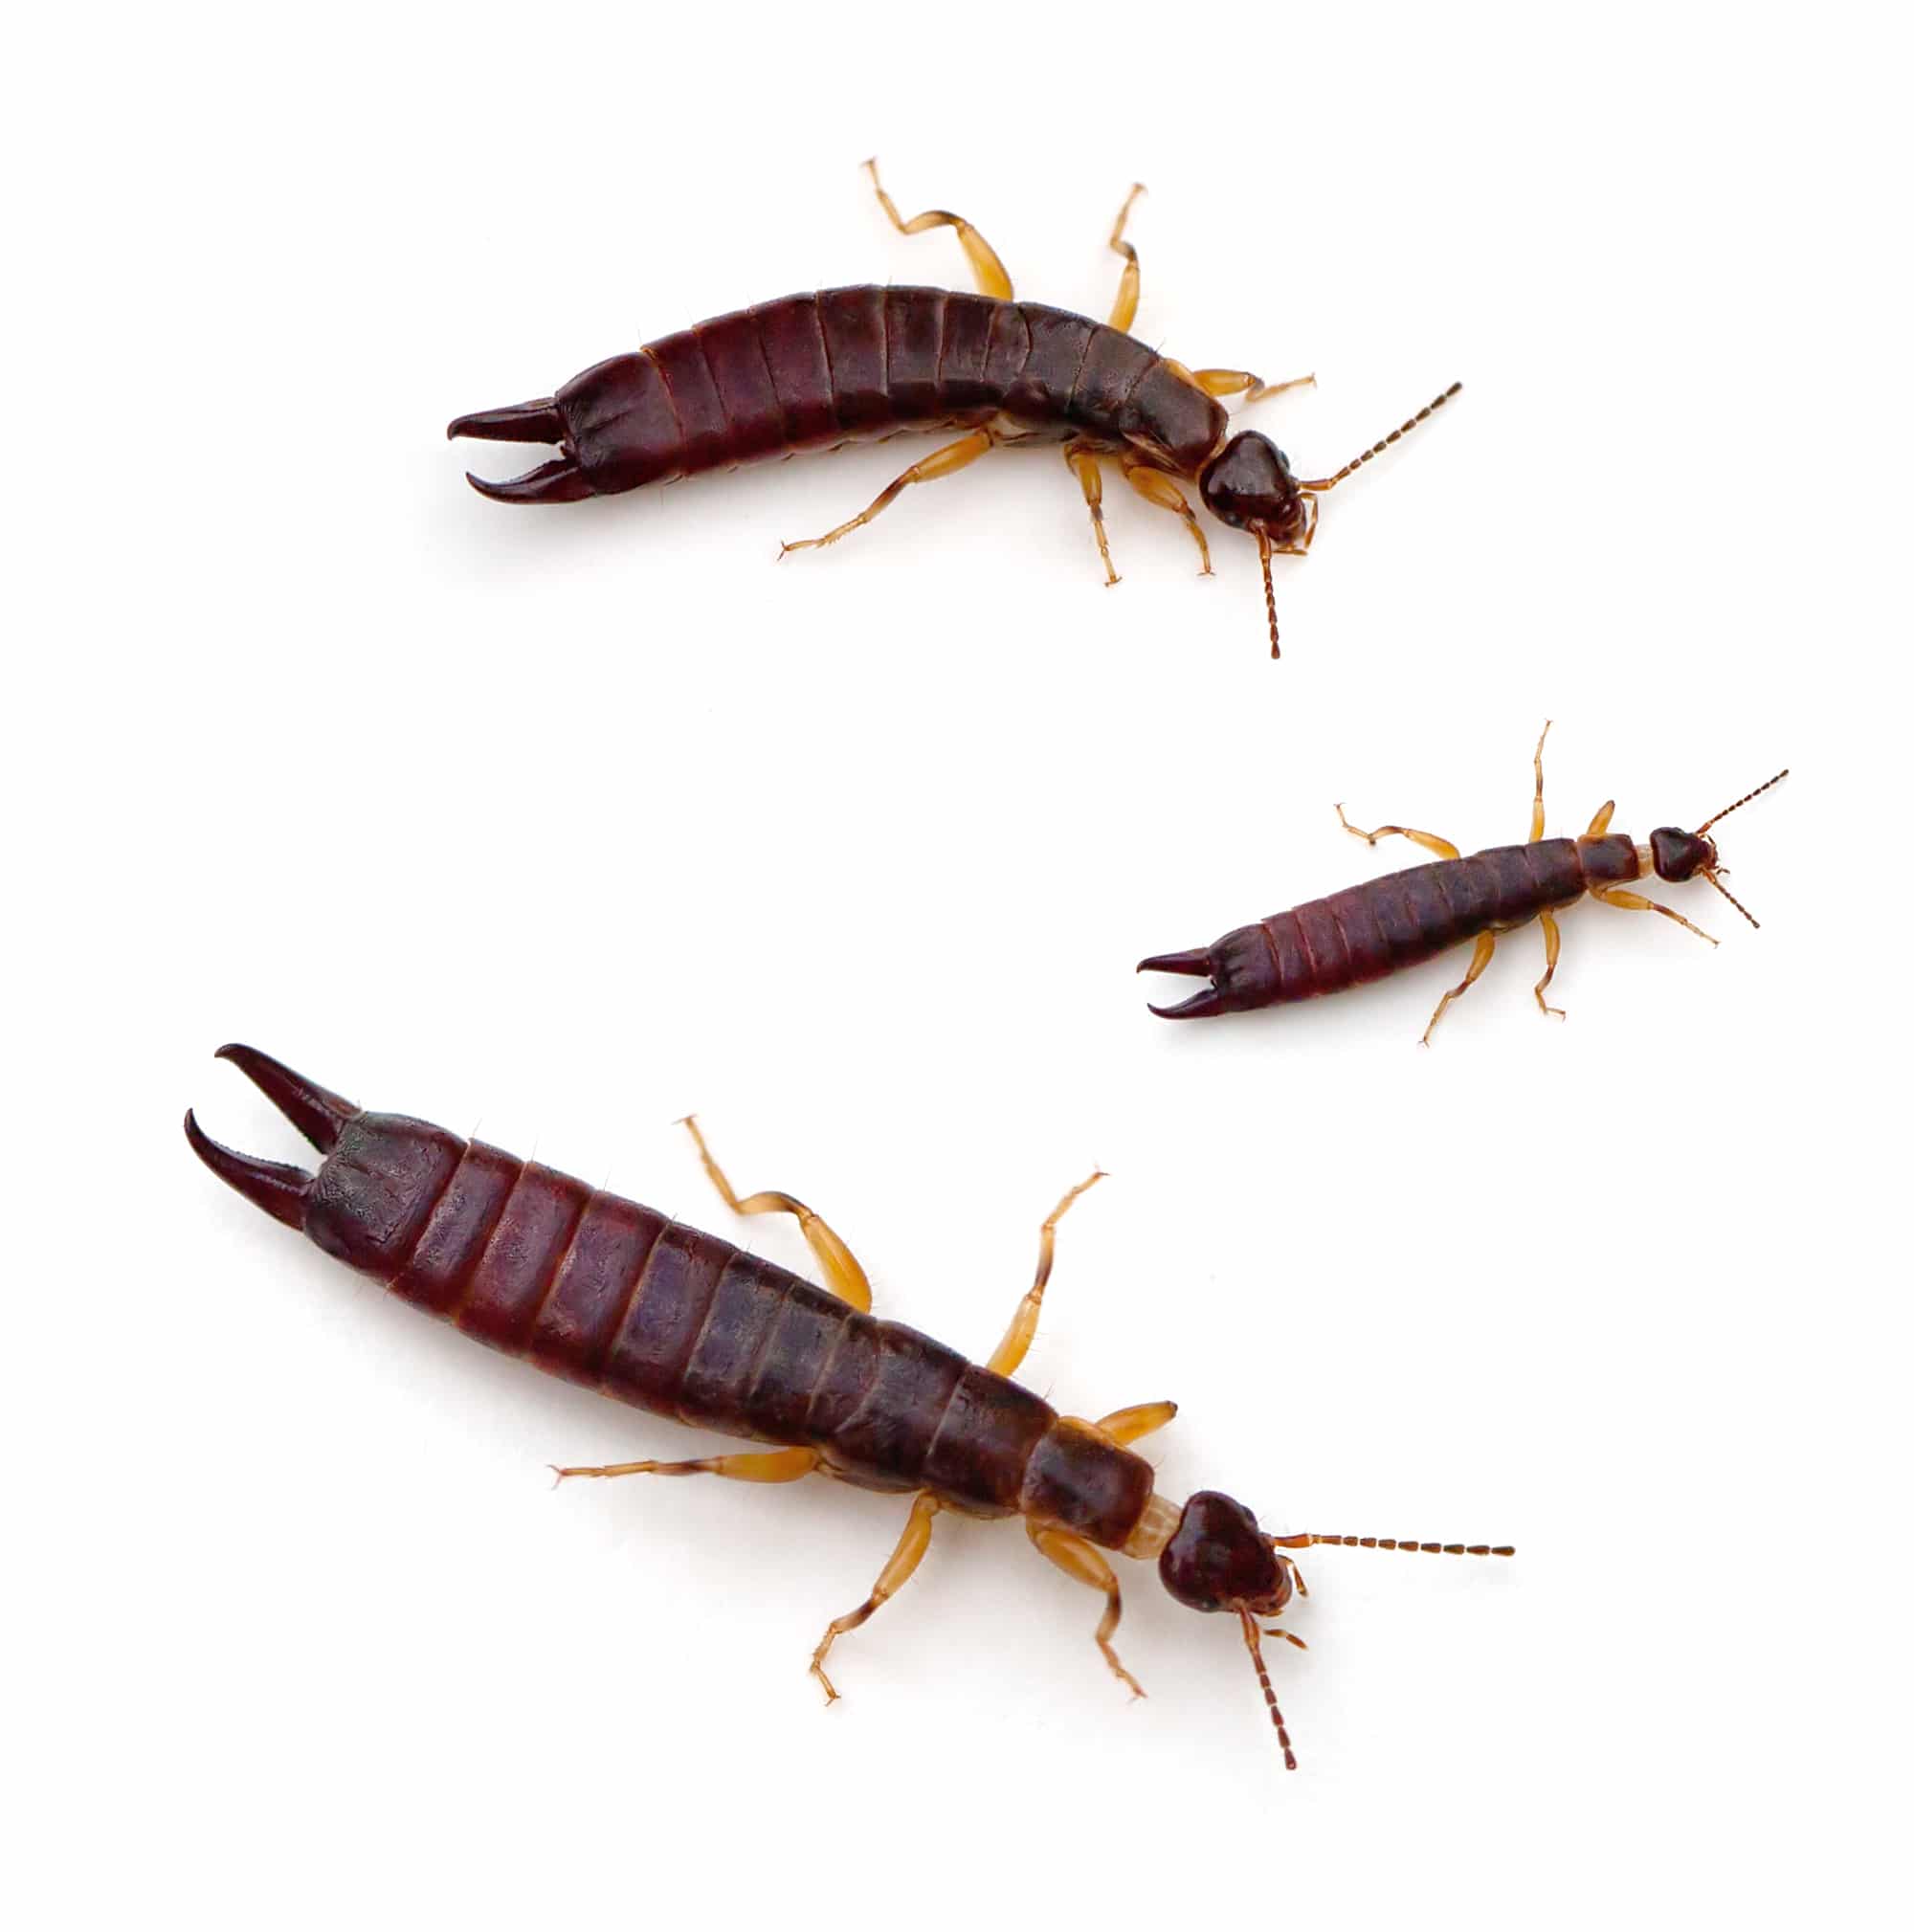 How To Get Rid Of Earwigs in The Garden